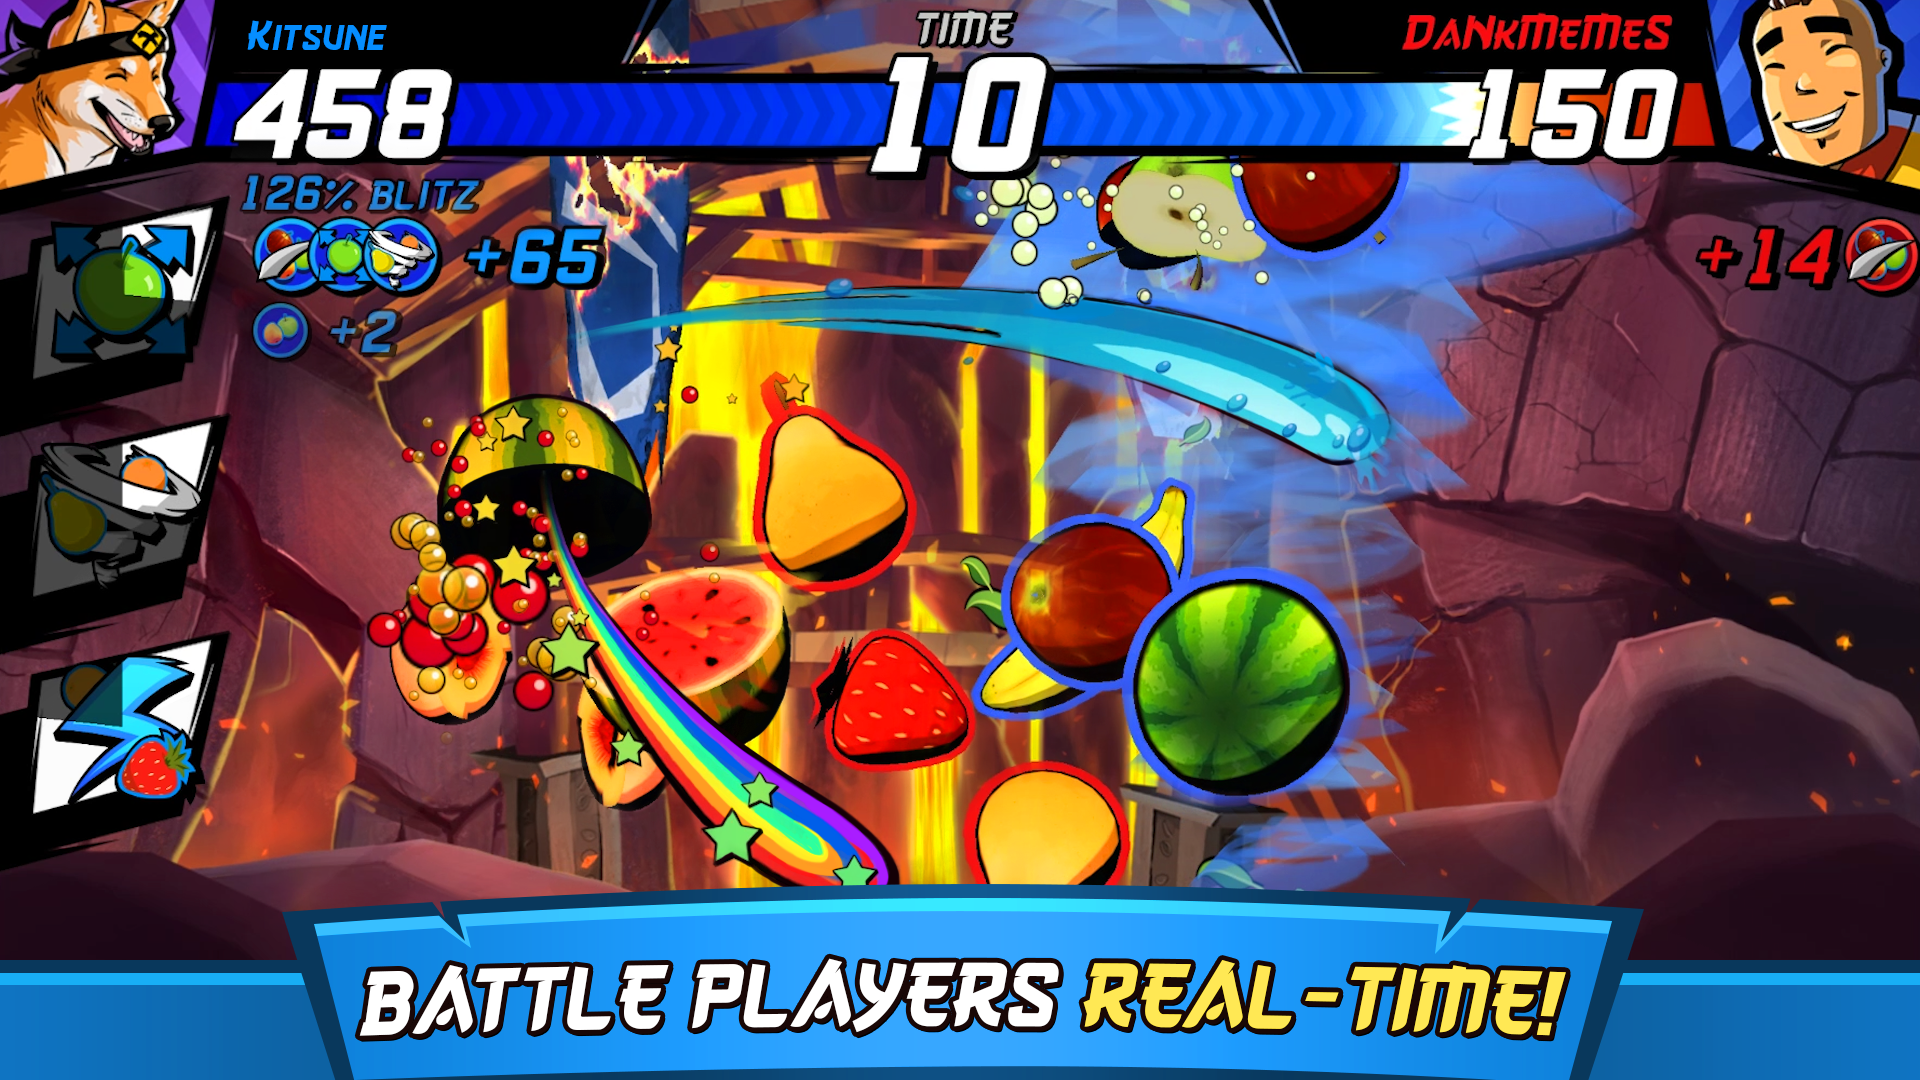 Download Fruit Ninja APK for Android